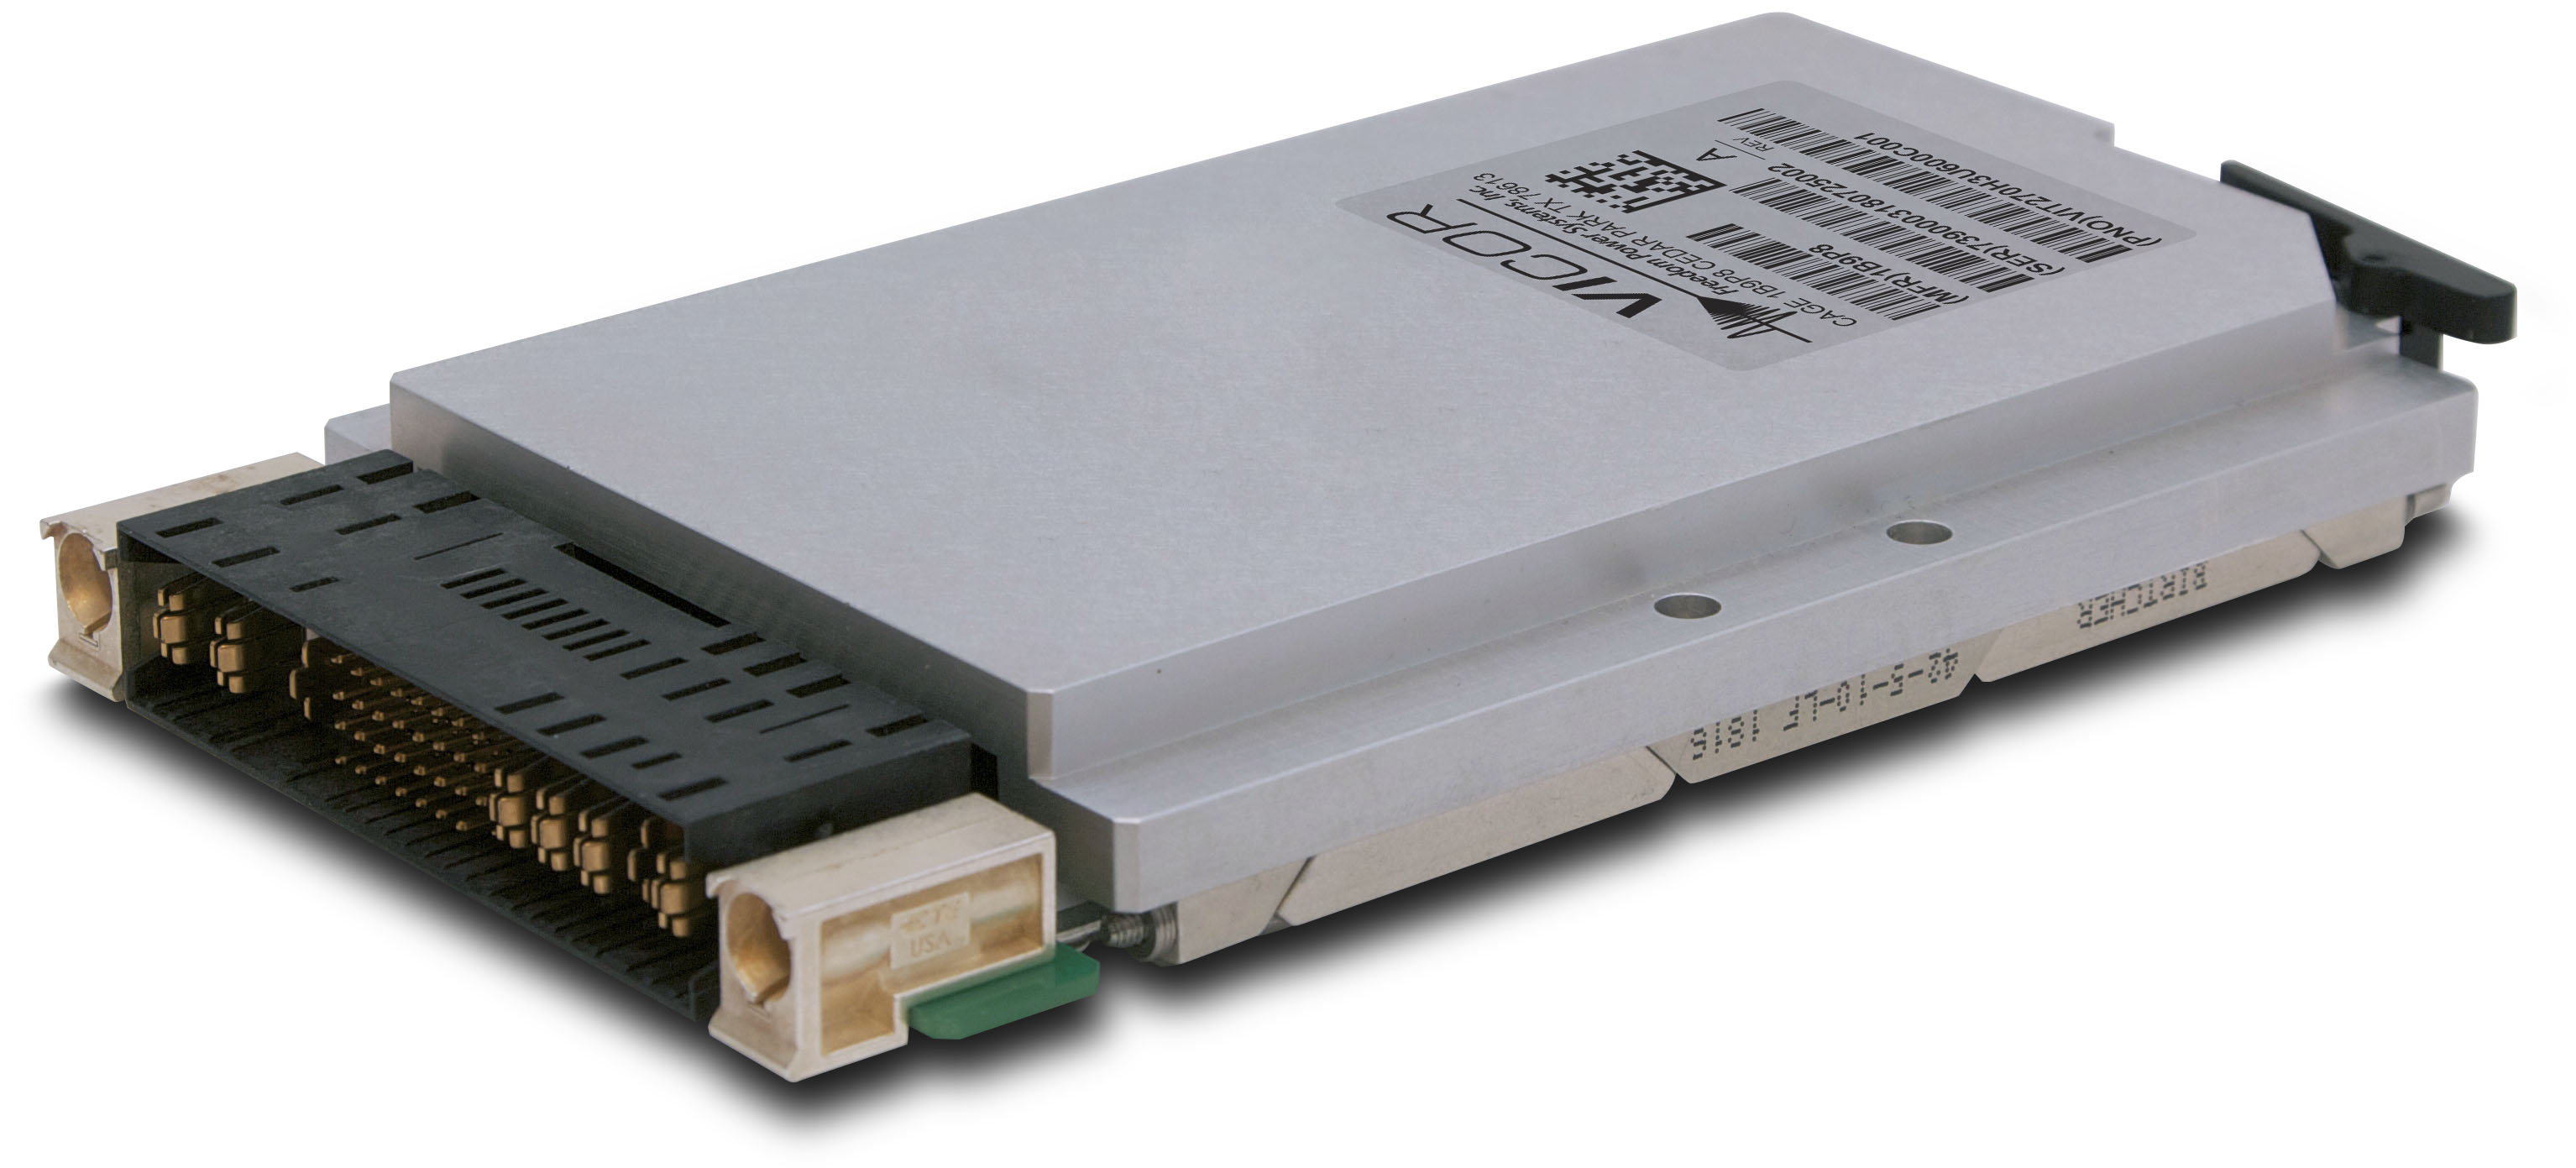 VITA 62 Power Supplies for MIL-COTS VPX Applications